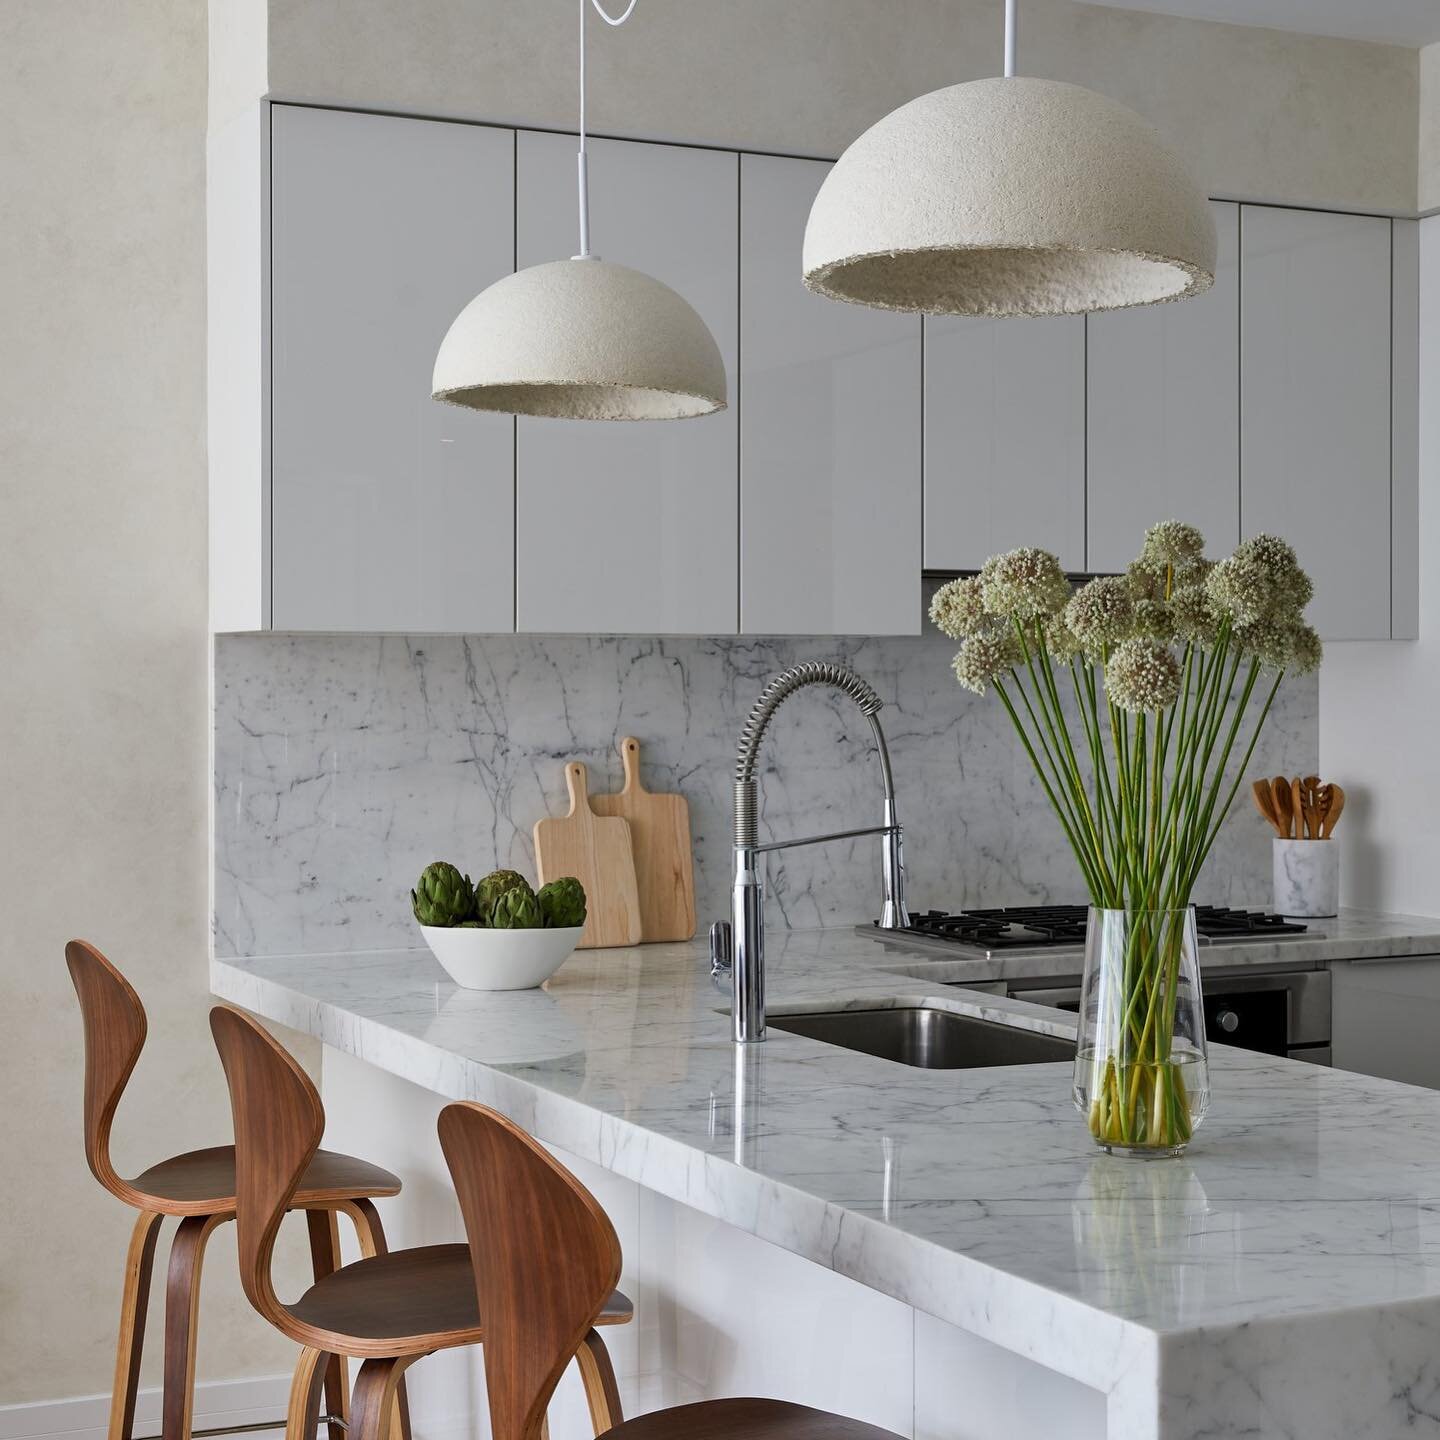 Mushrooms are not just for eating in this modern kitchen in Tribeca, NYC. Mycelium-grown pendants bring a storied and surprising material into the heart of the home, where we aren&rsquo;t alone in feeling is quite a natural fit. 

Interior Design: @k